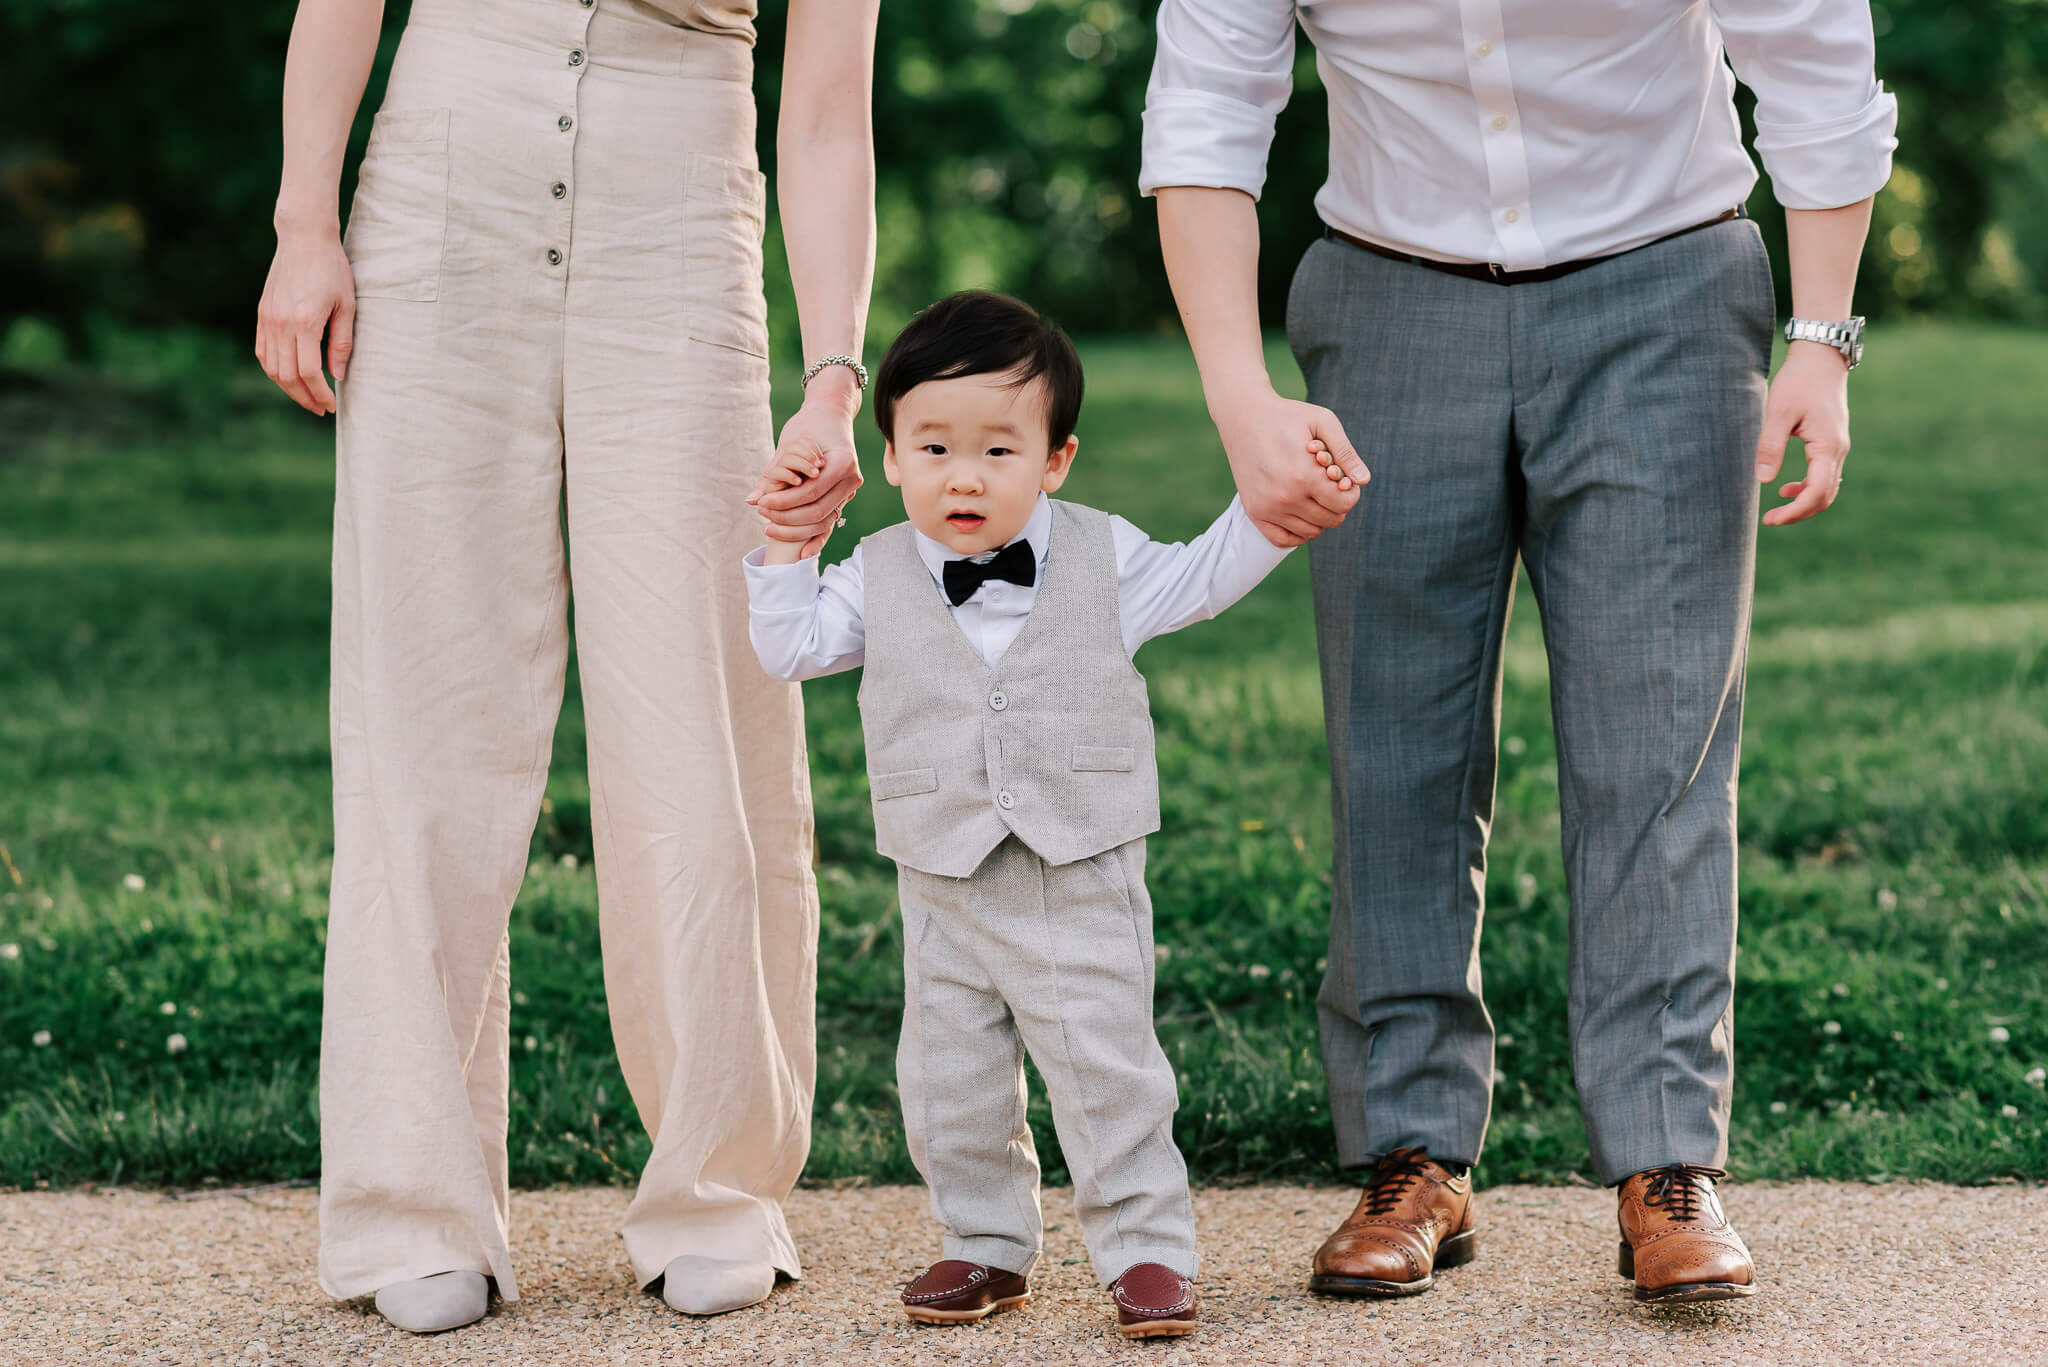 A toddler boy stands holding parents hands in a park path wearing a grey suit and black bowtie